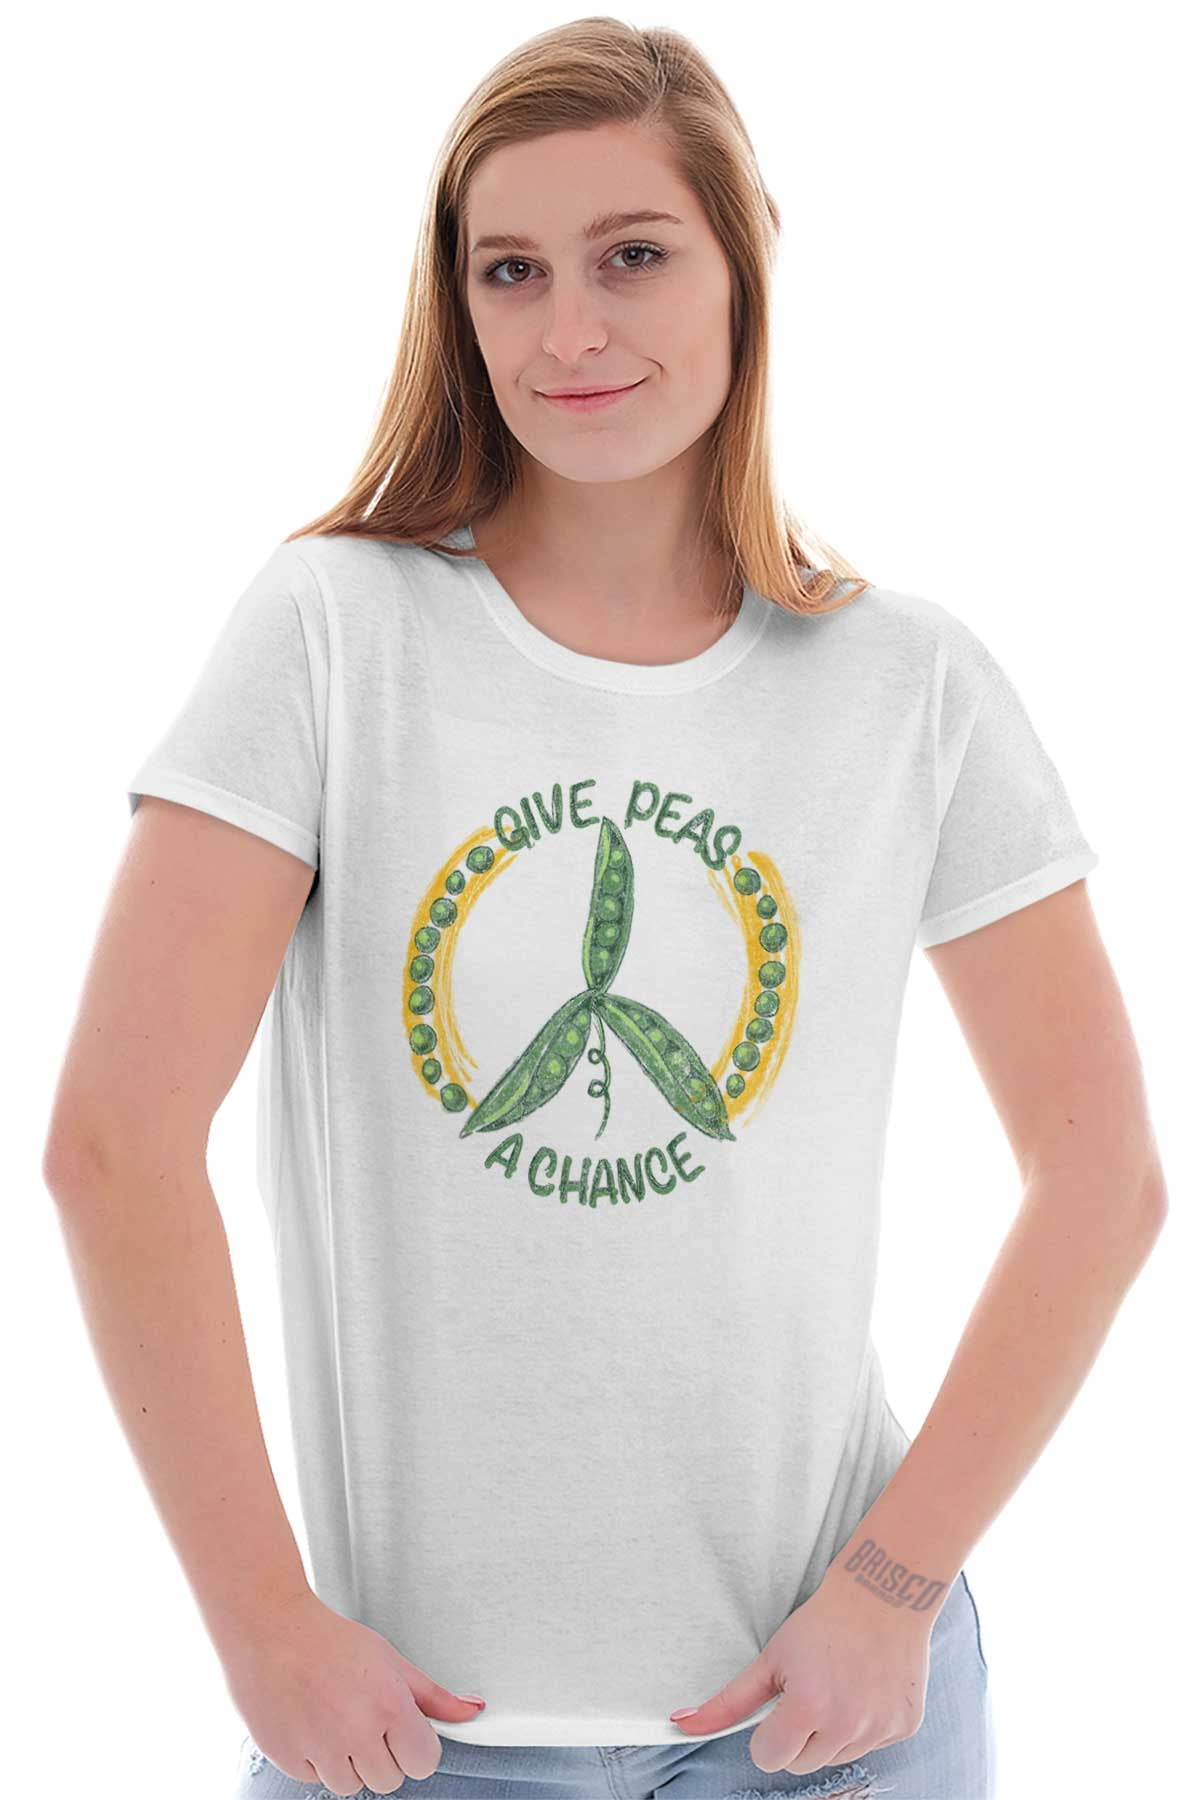 Give Peas A Chance Home Gardening Gardener Girls Youth Crewneck T Shirts Tees 